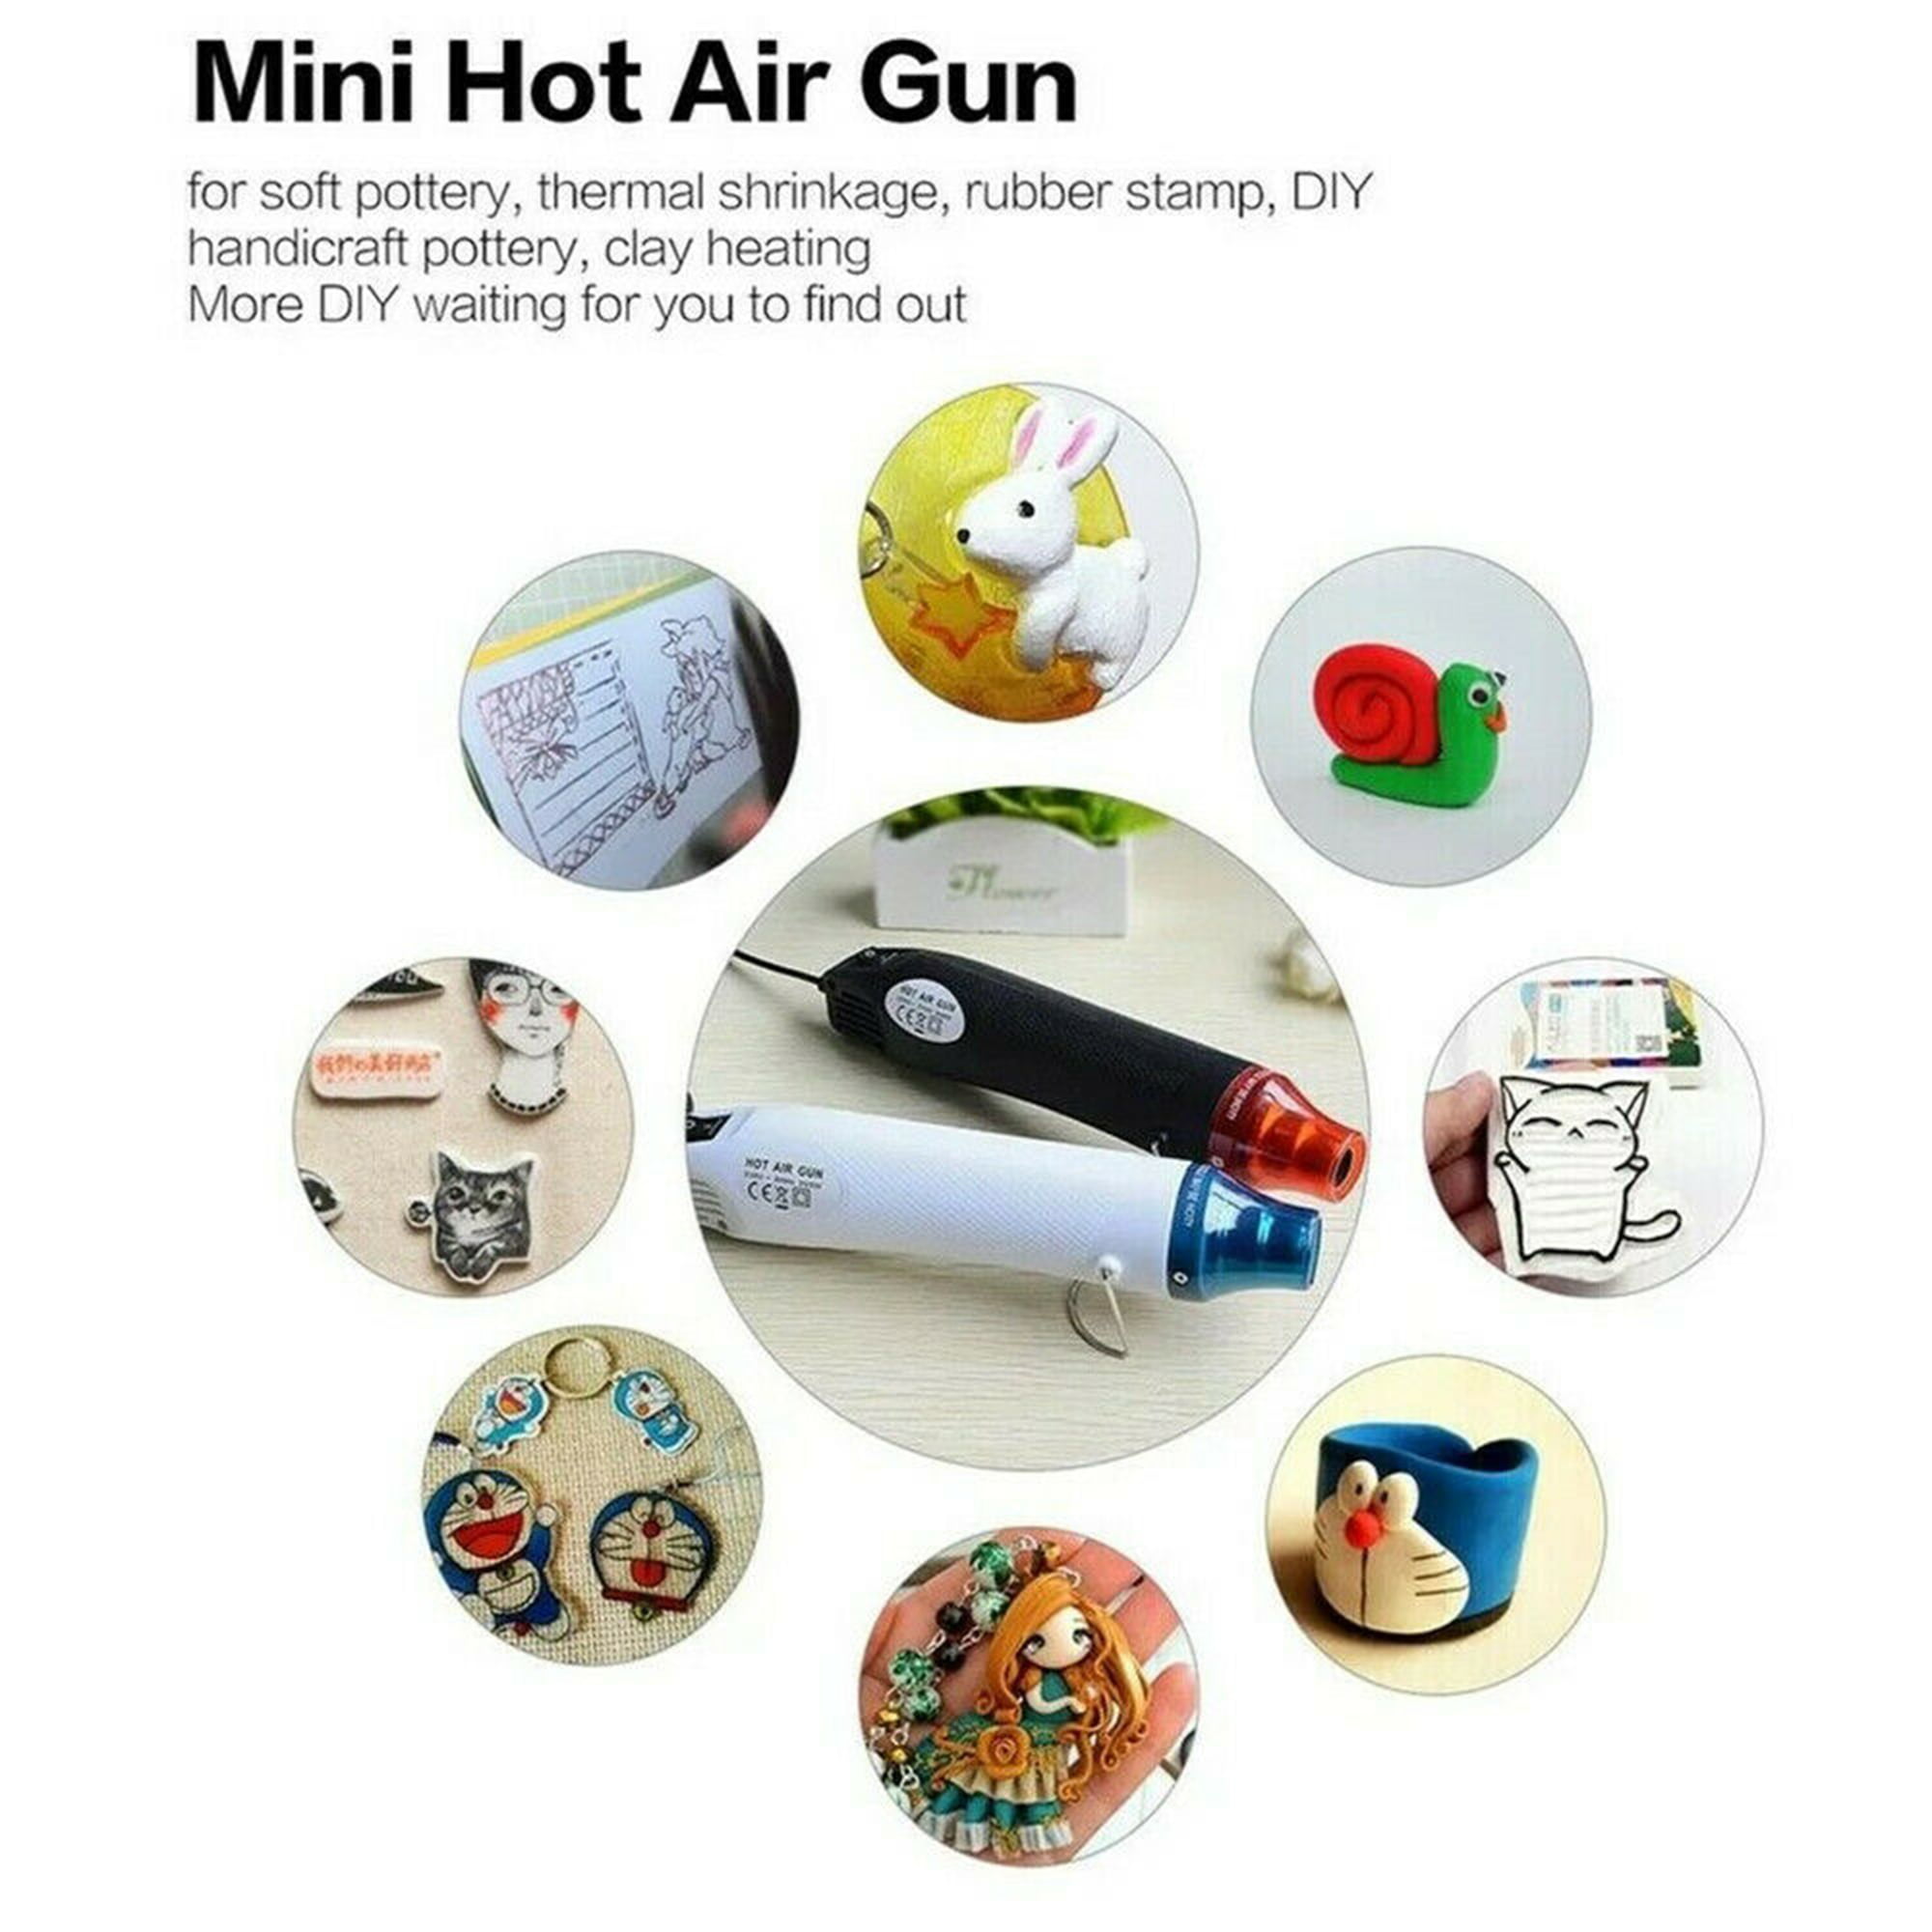 GetUSCart- Leceha Mini Heat Gun for Epoxy Resin, 300W Portable Heat Gun for  Crafts DIY Acrylic Resin Craft, Dryer Craft Heat Tool for Cup Turner,  Shrink Wrapping, Crafts Embossing, Drying Paint